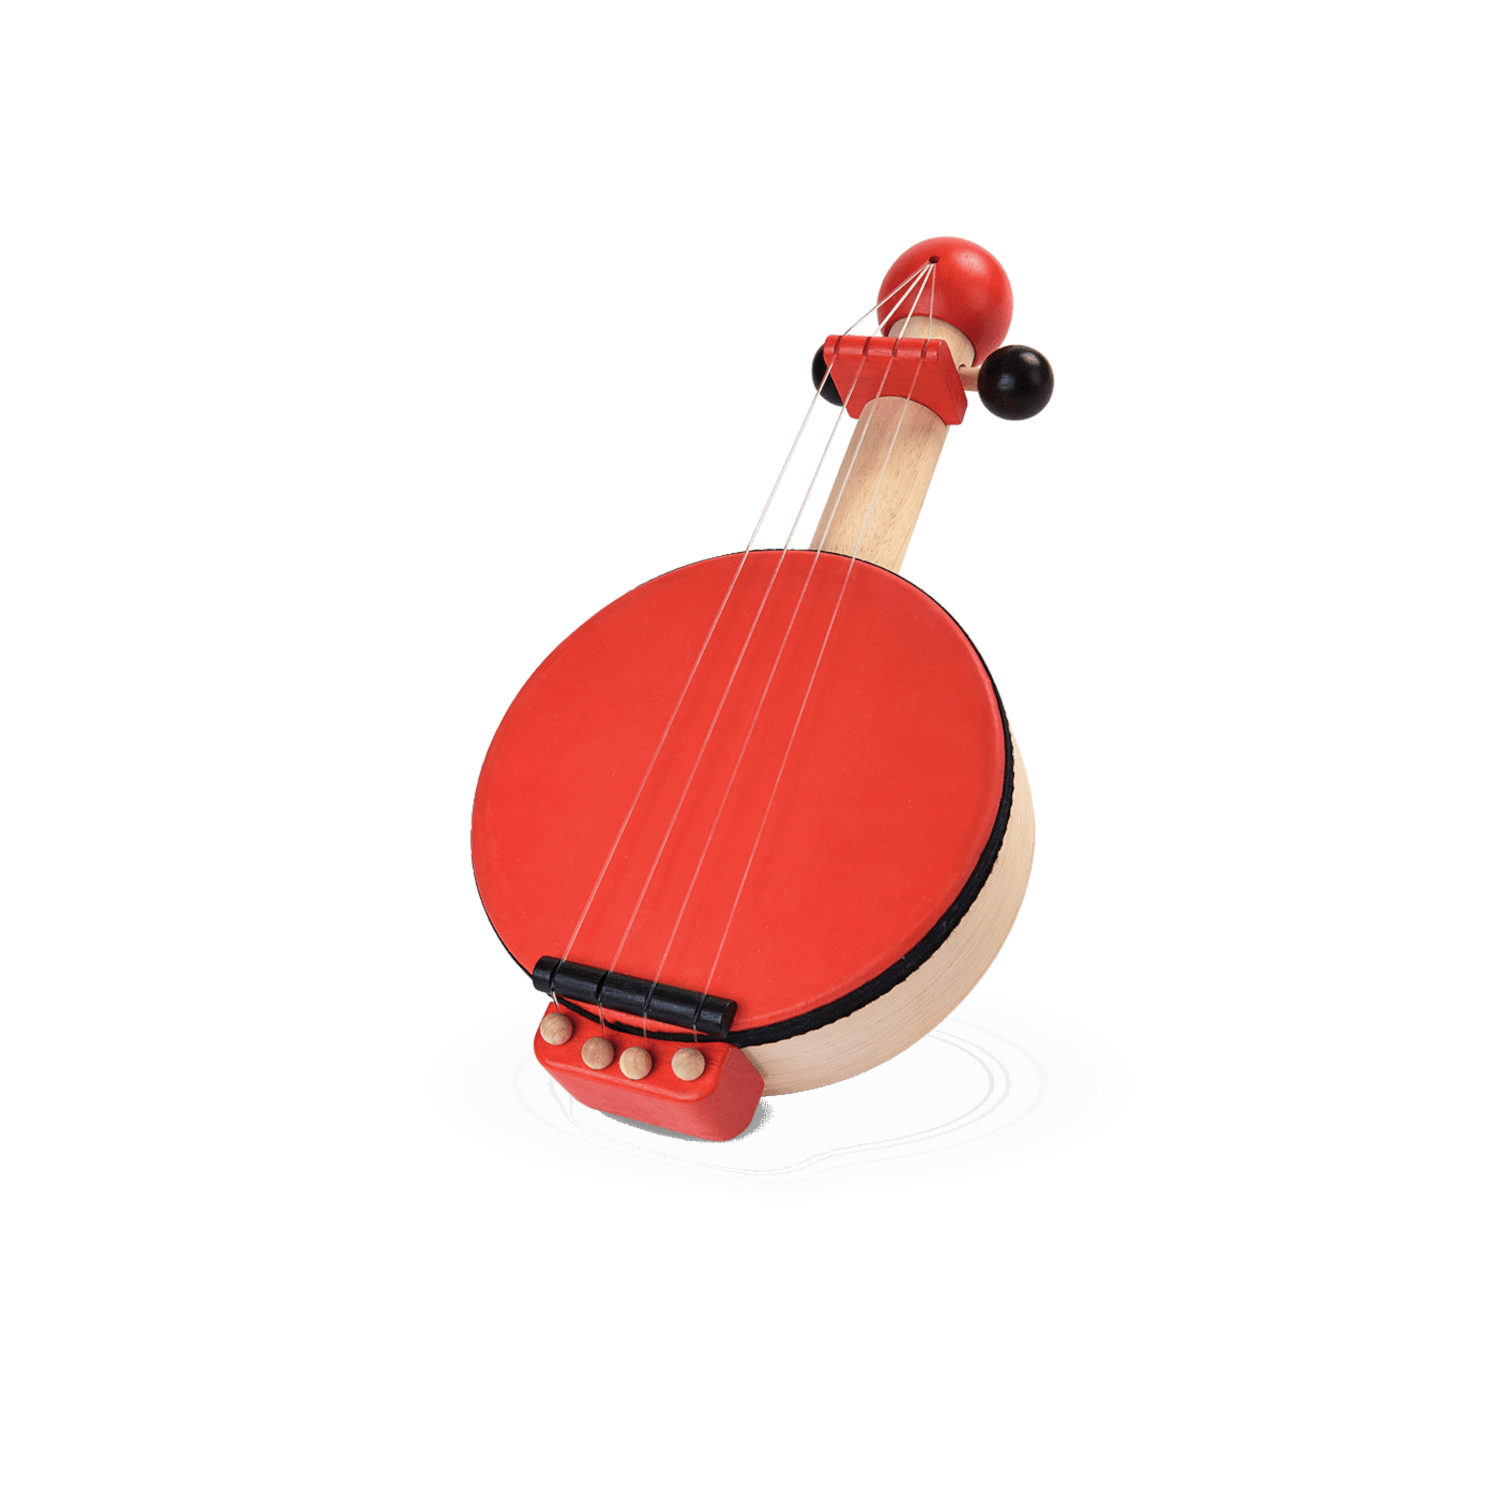 6411_PlanToys_BANJO_Music_Musical_Auditory_Concentration_Emotion_Coordination_Creative_3yrs_Wooden_toys_Education_toys_Safety_Toys_Non-toxic_0